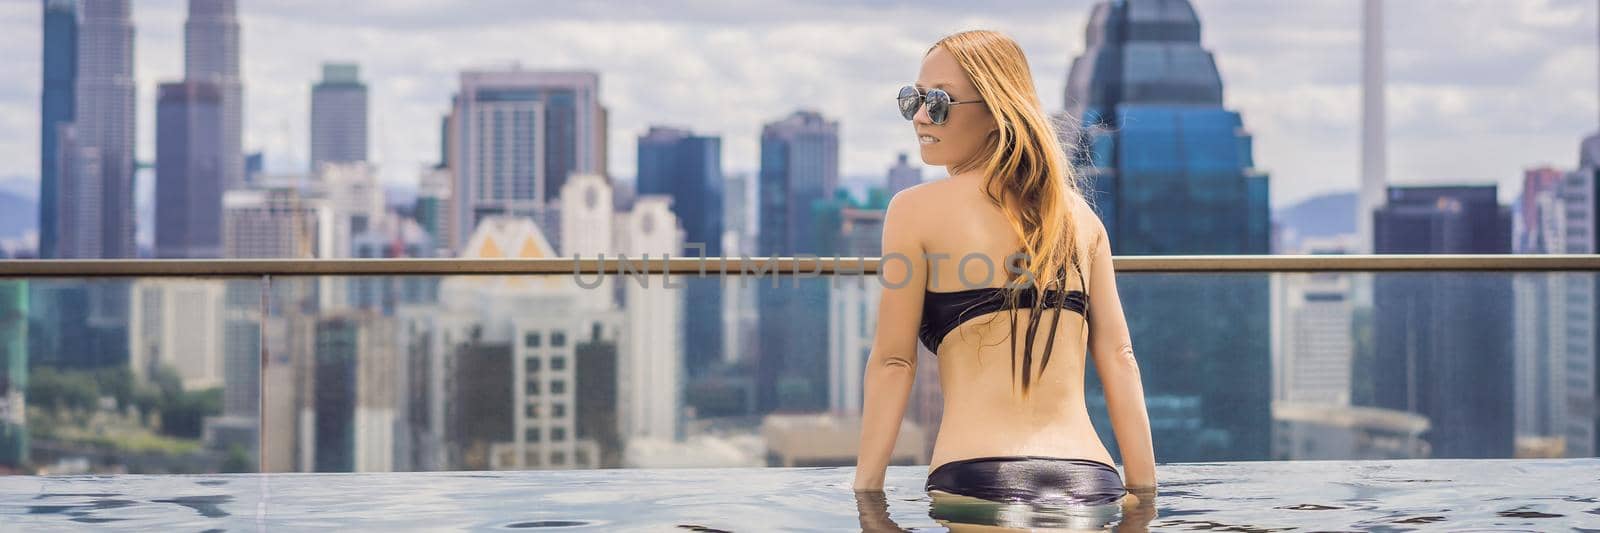 Young woman in outdoor swimming pool with city view in blue sky. Rich people BANNER, LONG FORMAT by galitskaya